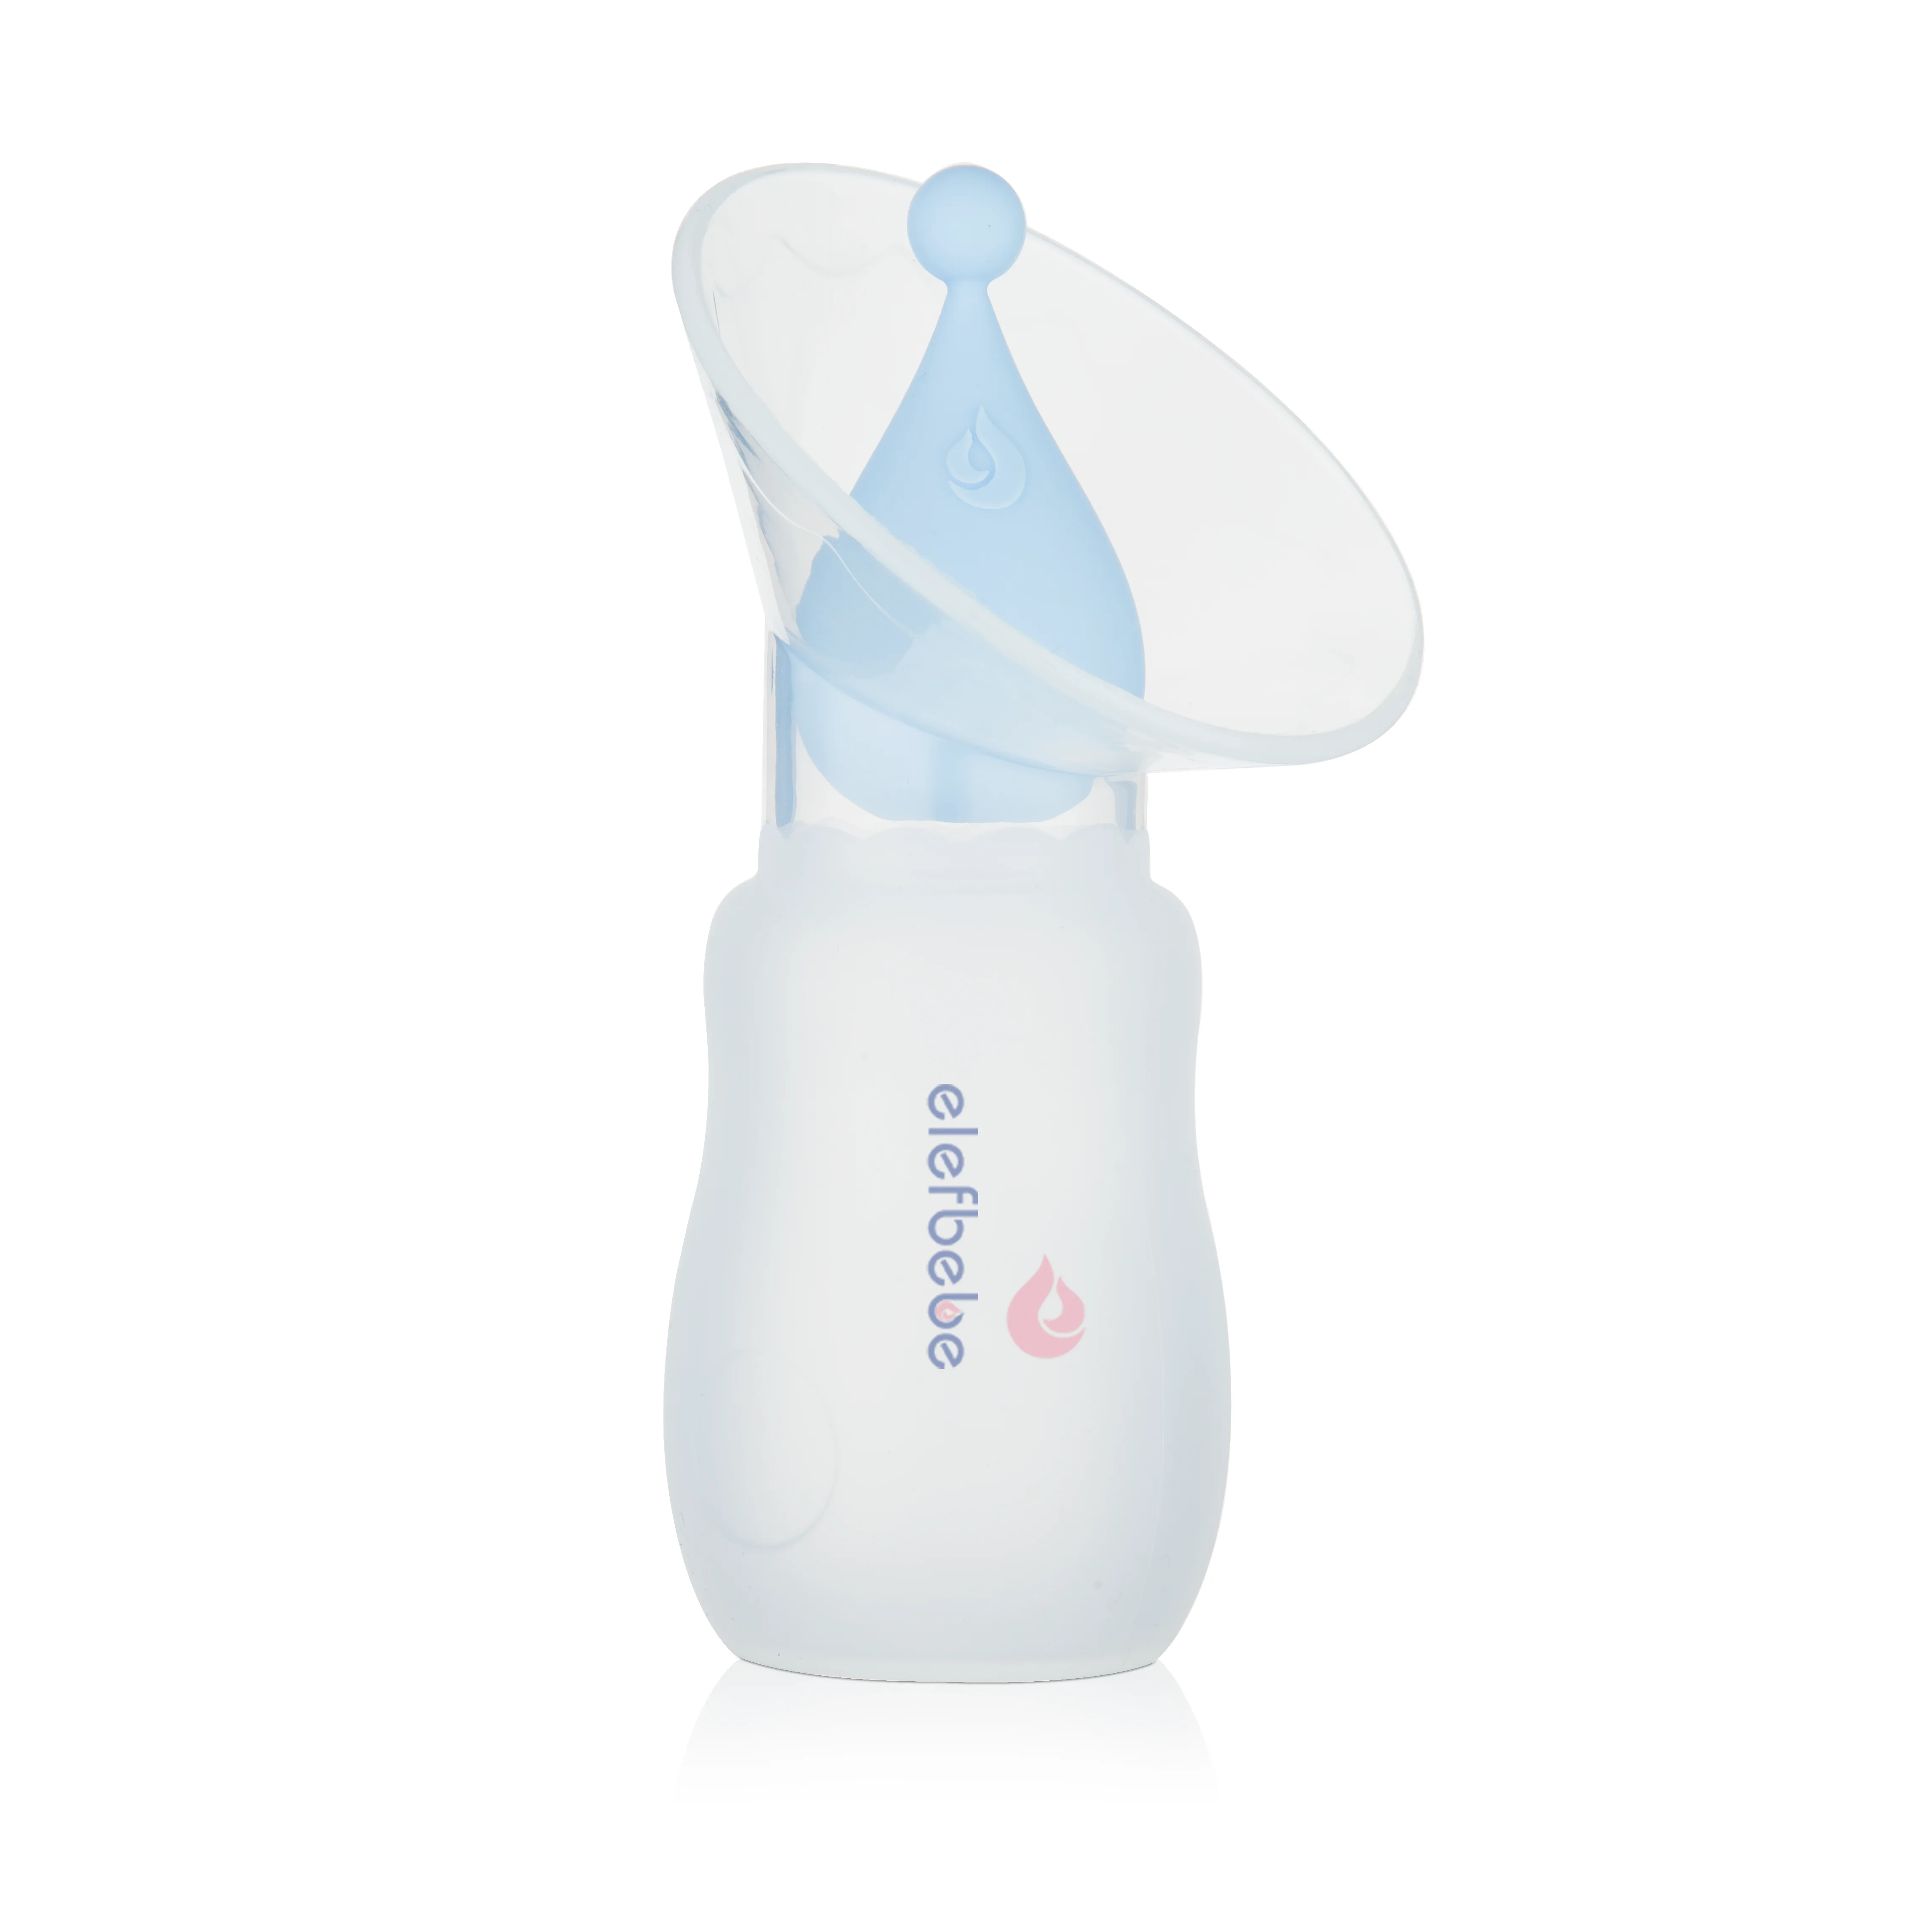 

Silicone Breastfeeding Manual Pump BPA Free Portable Saver Breast Milk Collector With Stopper & Lid, Sami-transparent